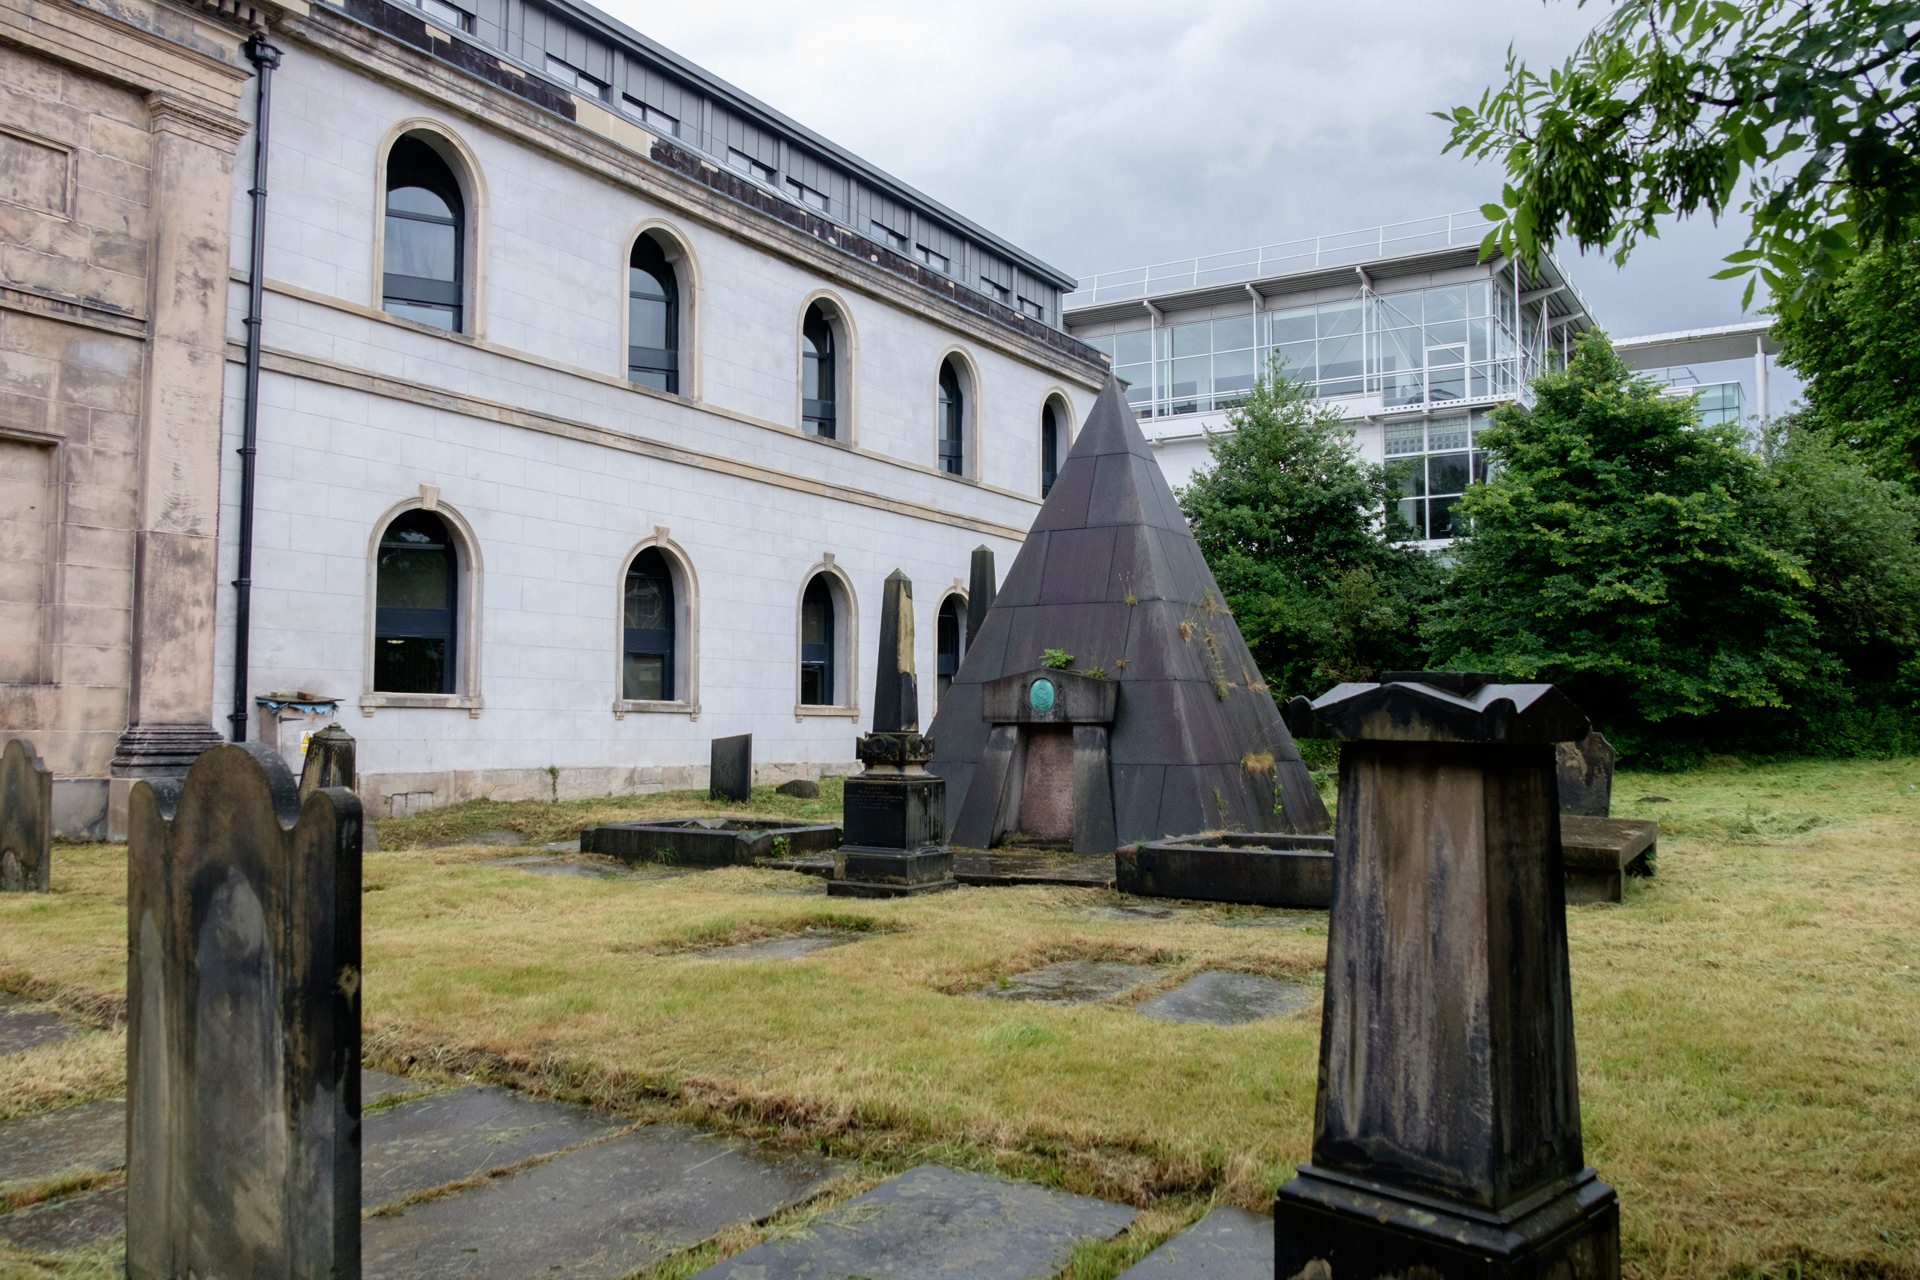 Looking at the pyramid-shaped tomb in the centre of the graveyard. There are other, smaller, more traditionally shaped graves around it. To the left of the photo is the rebuilt St Andrews building